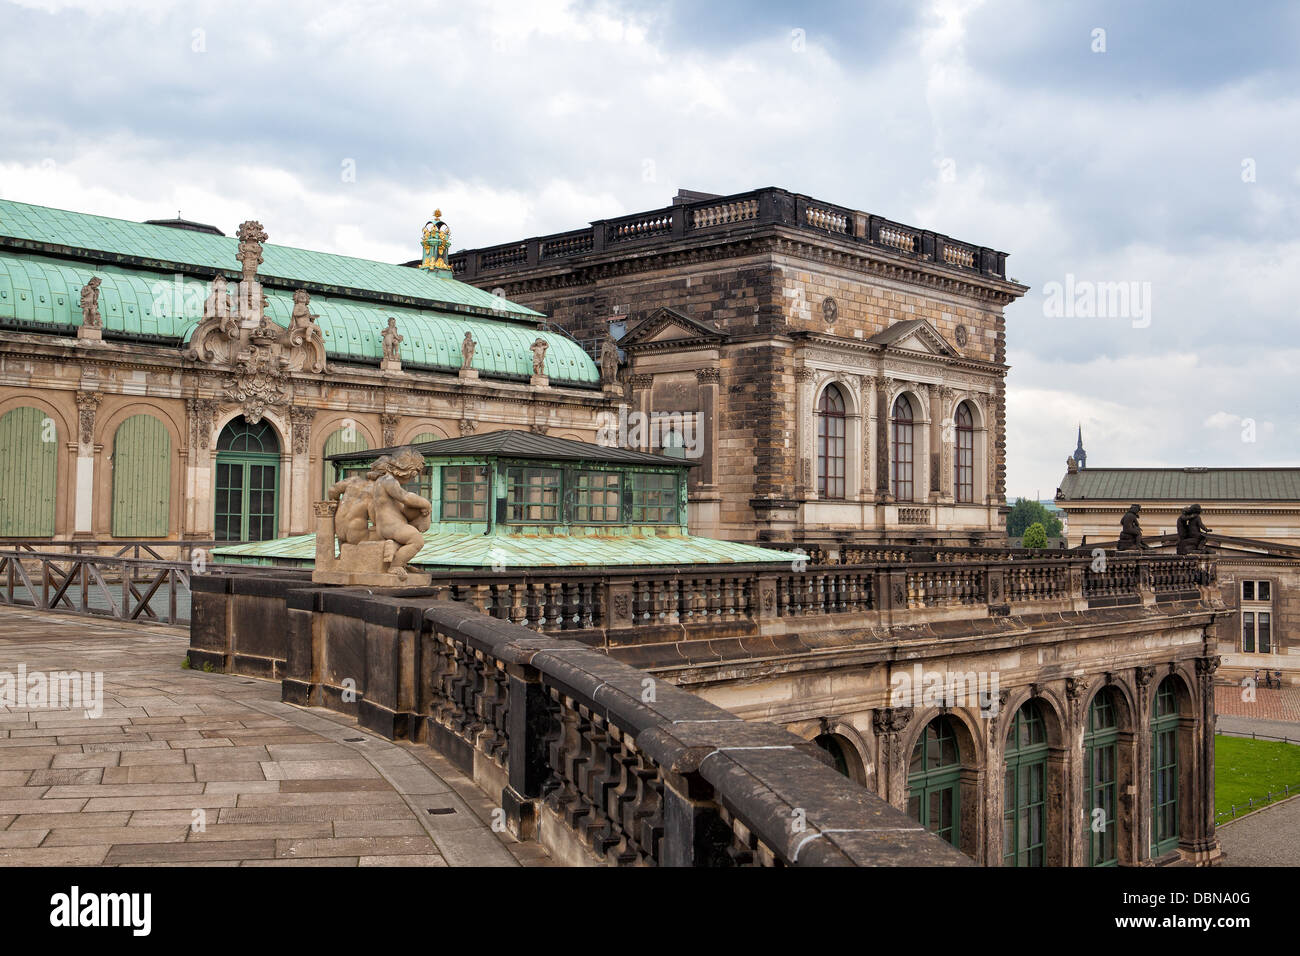 The Zwinger - palace in Dresden, eastern Germany, built in Rococo style. Stock Photo